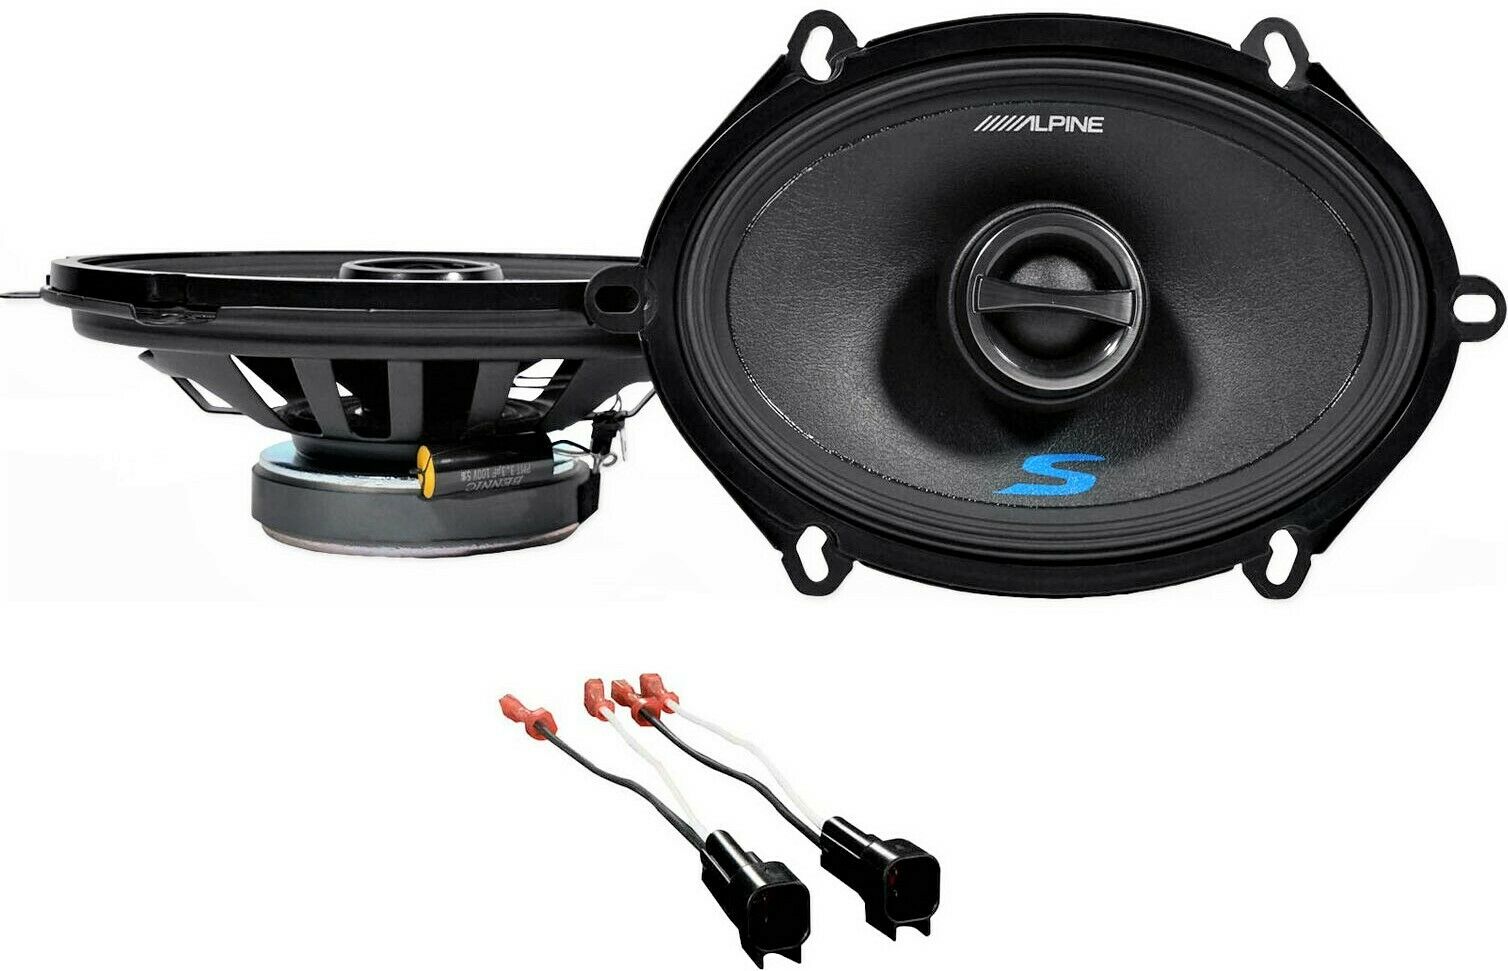 Alpine S 5x7" Front Factory Speaker Replacement Kit For 2004-2006 Ford F-150